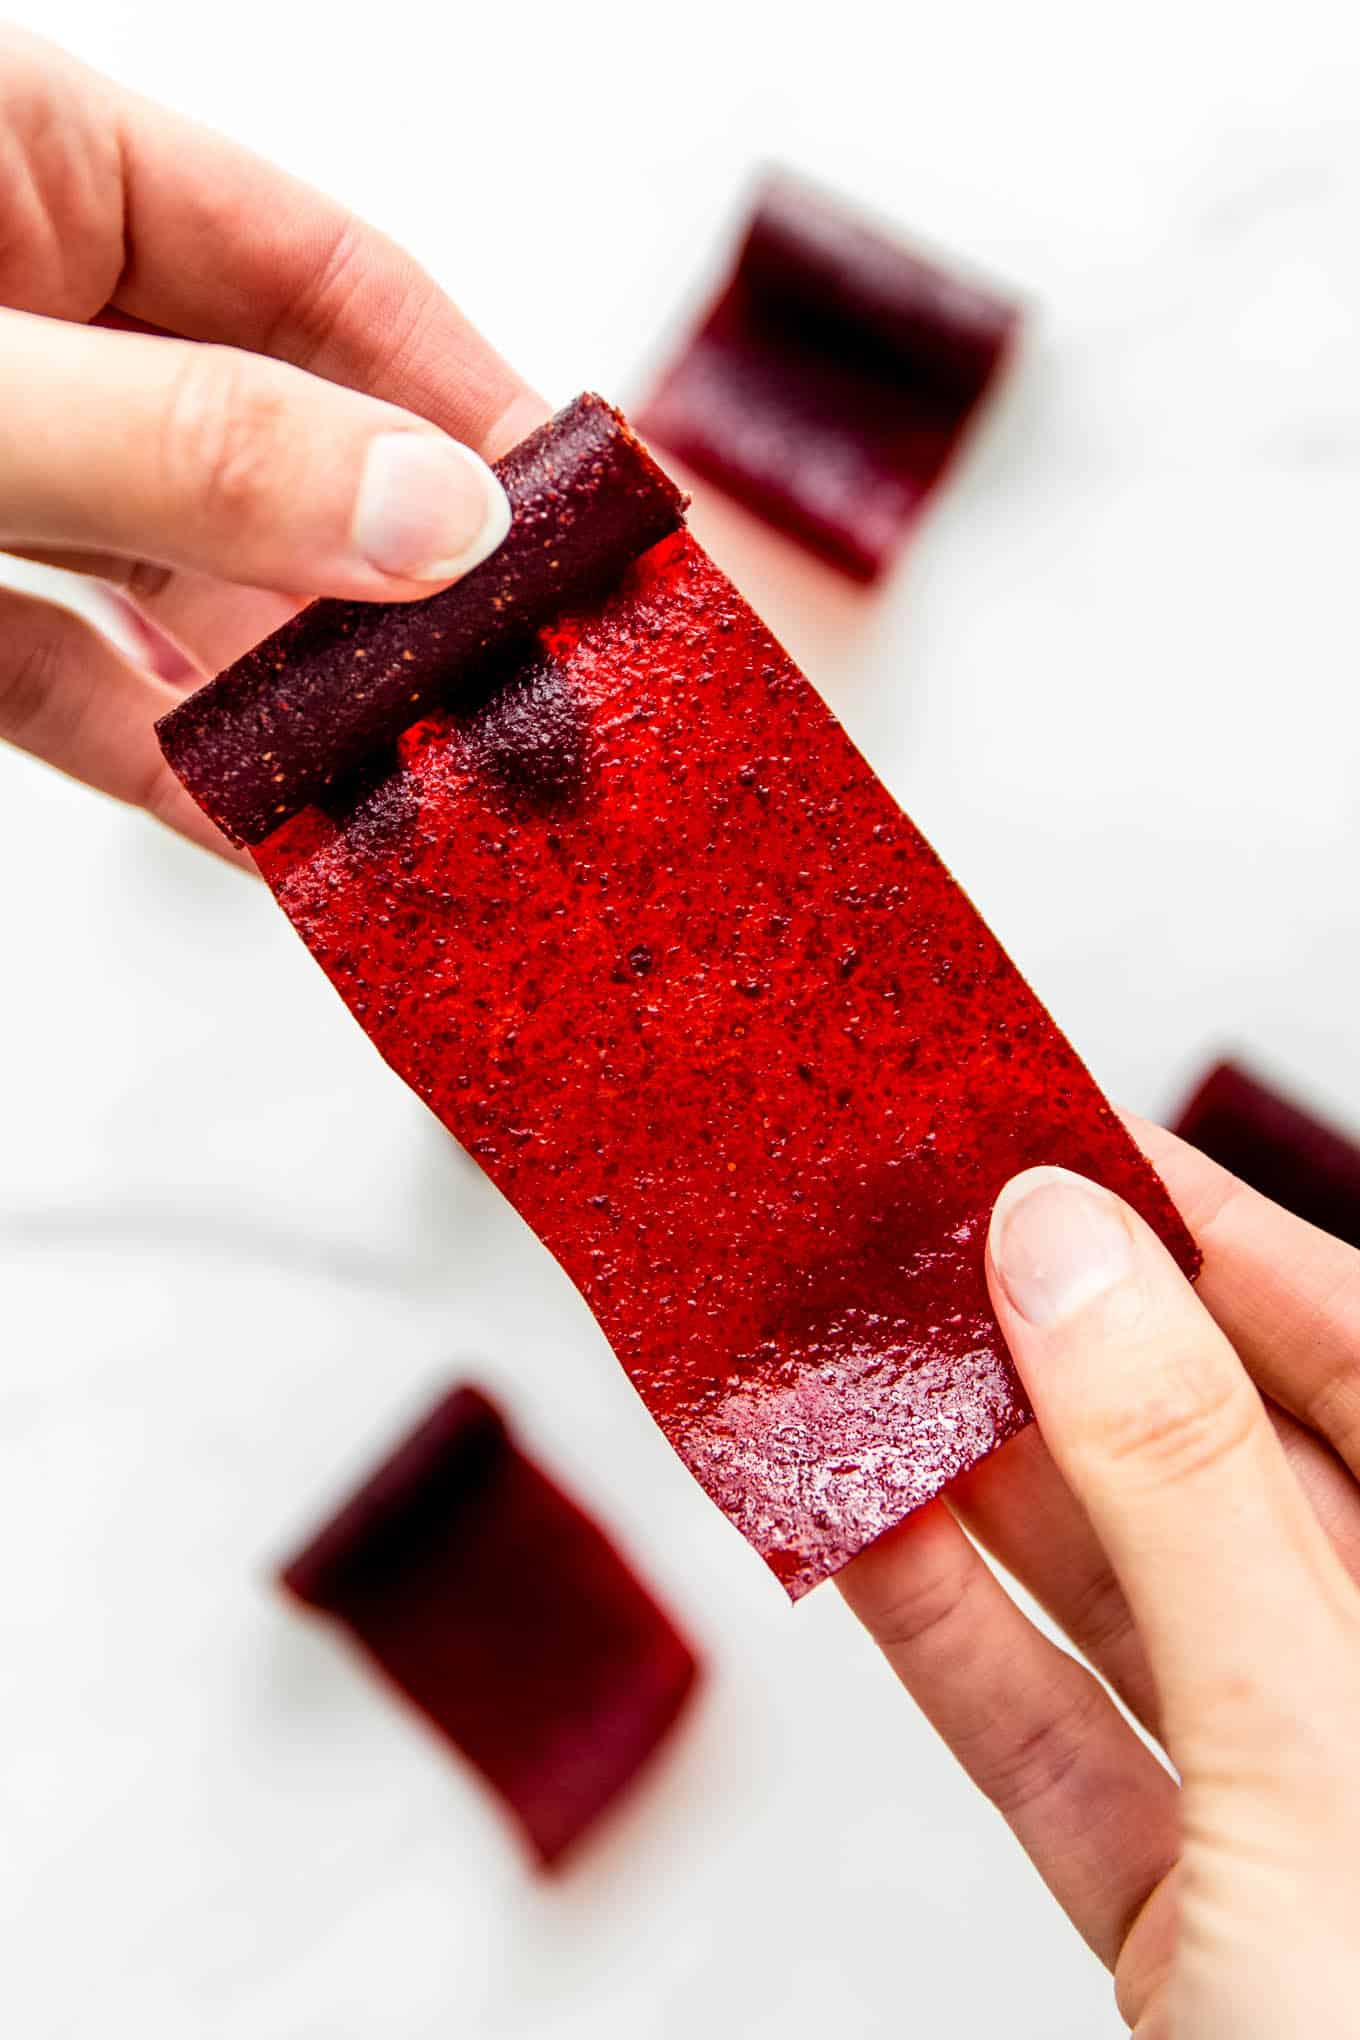 Homemade Fruit Roll-ups – FOOD AT UBC VANCOUVER